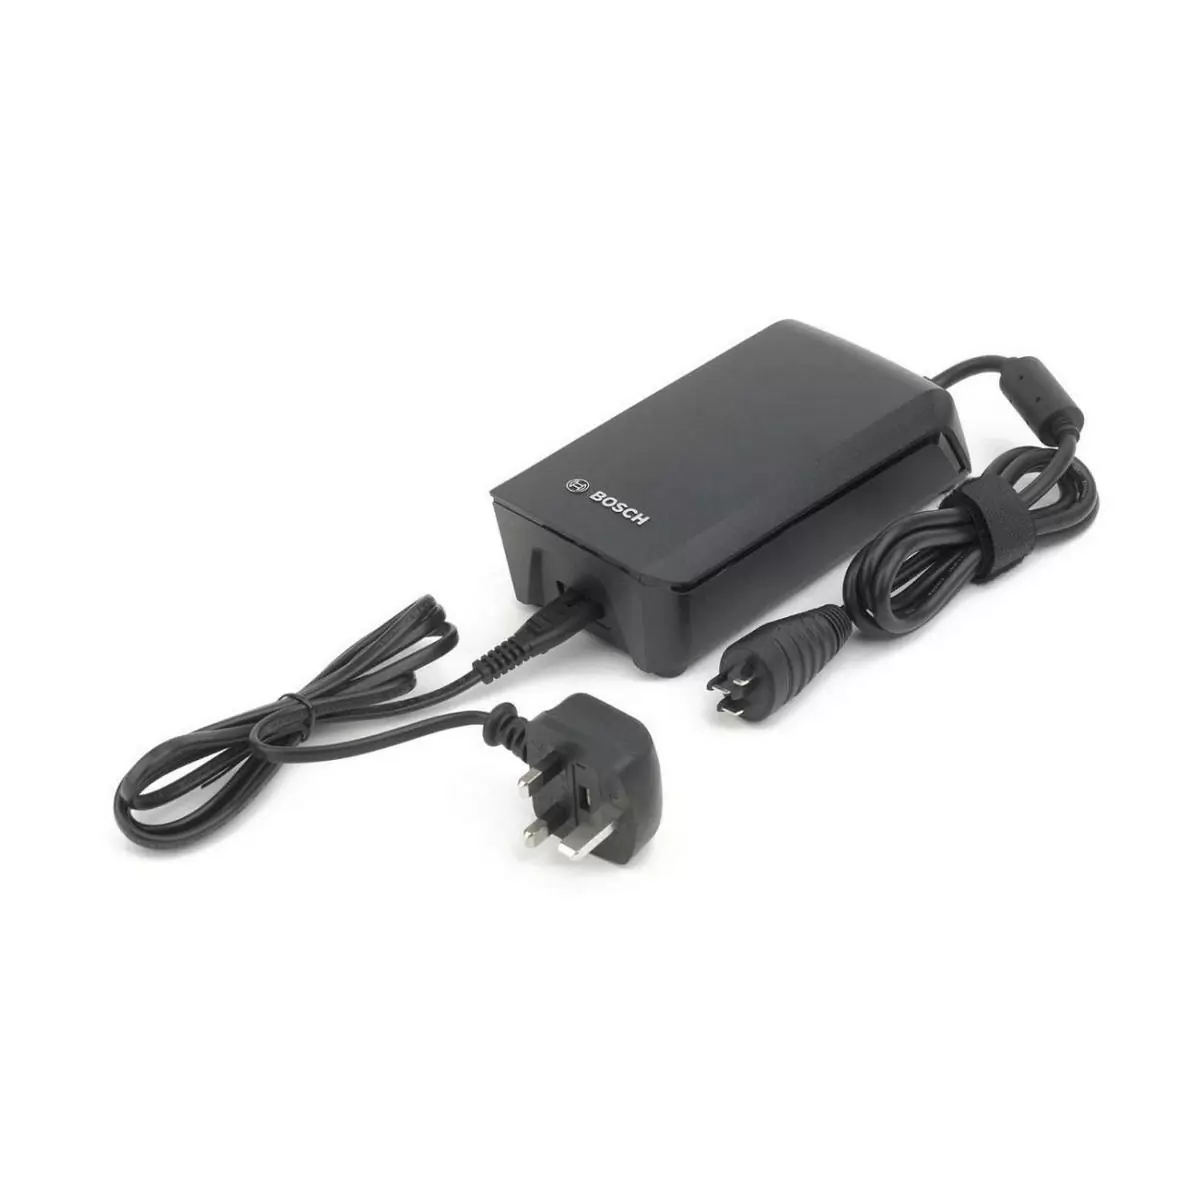 battery charger 4a active performance uk cable plug - image